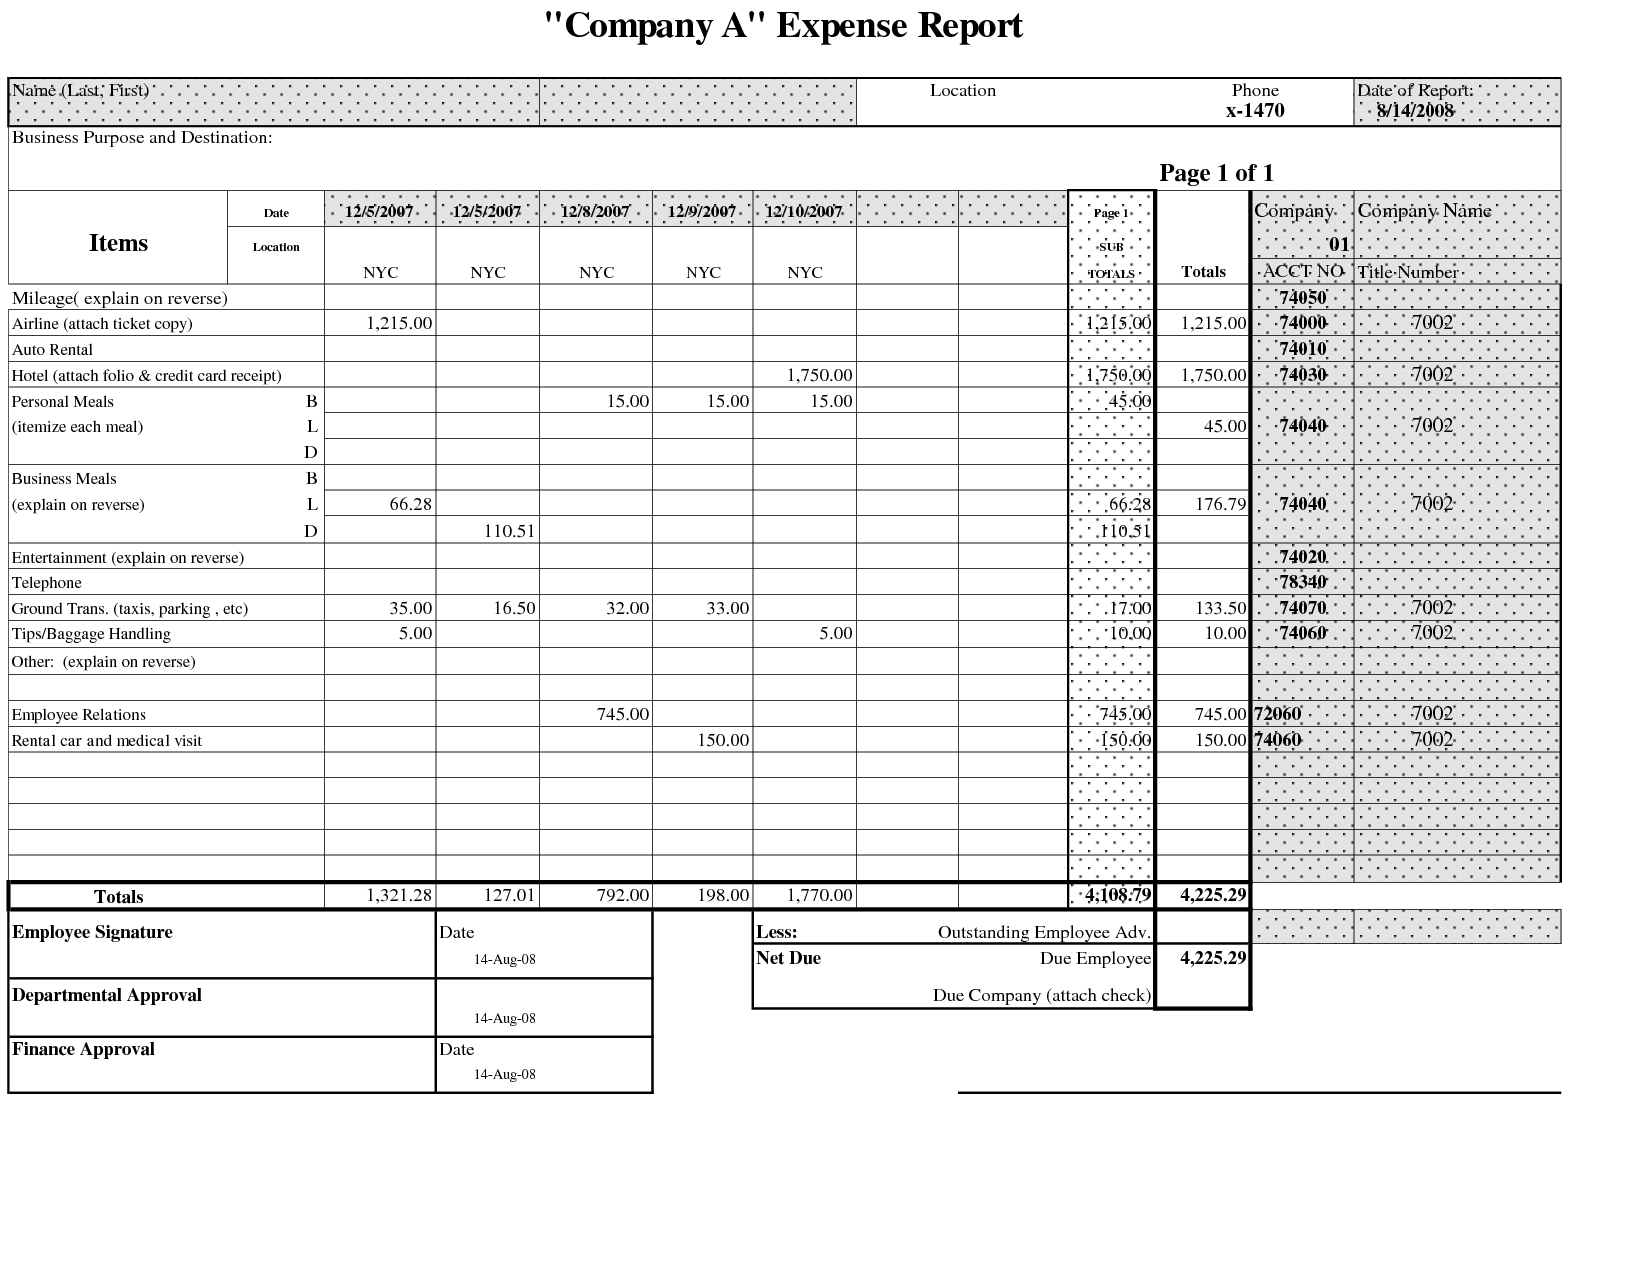 5 New Excel Report Templates | Excel Templates Throughout Company Expense Report Template